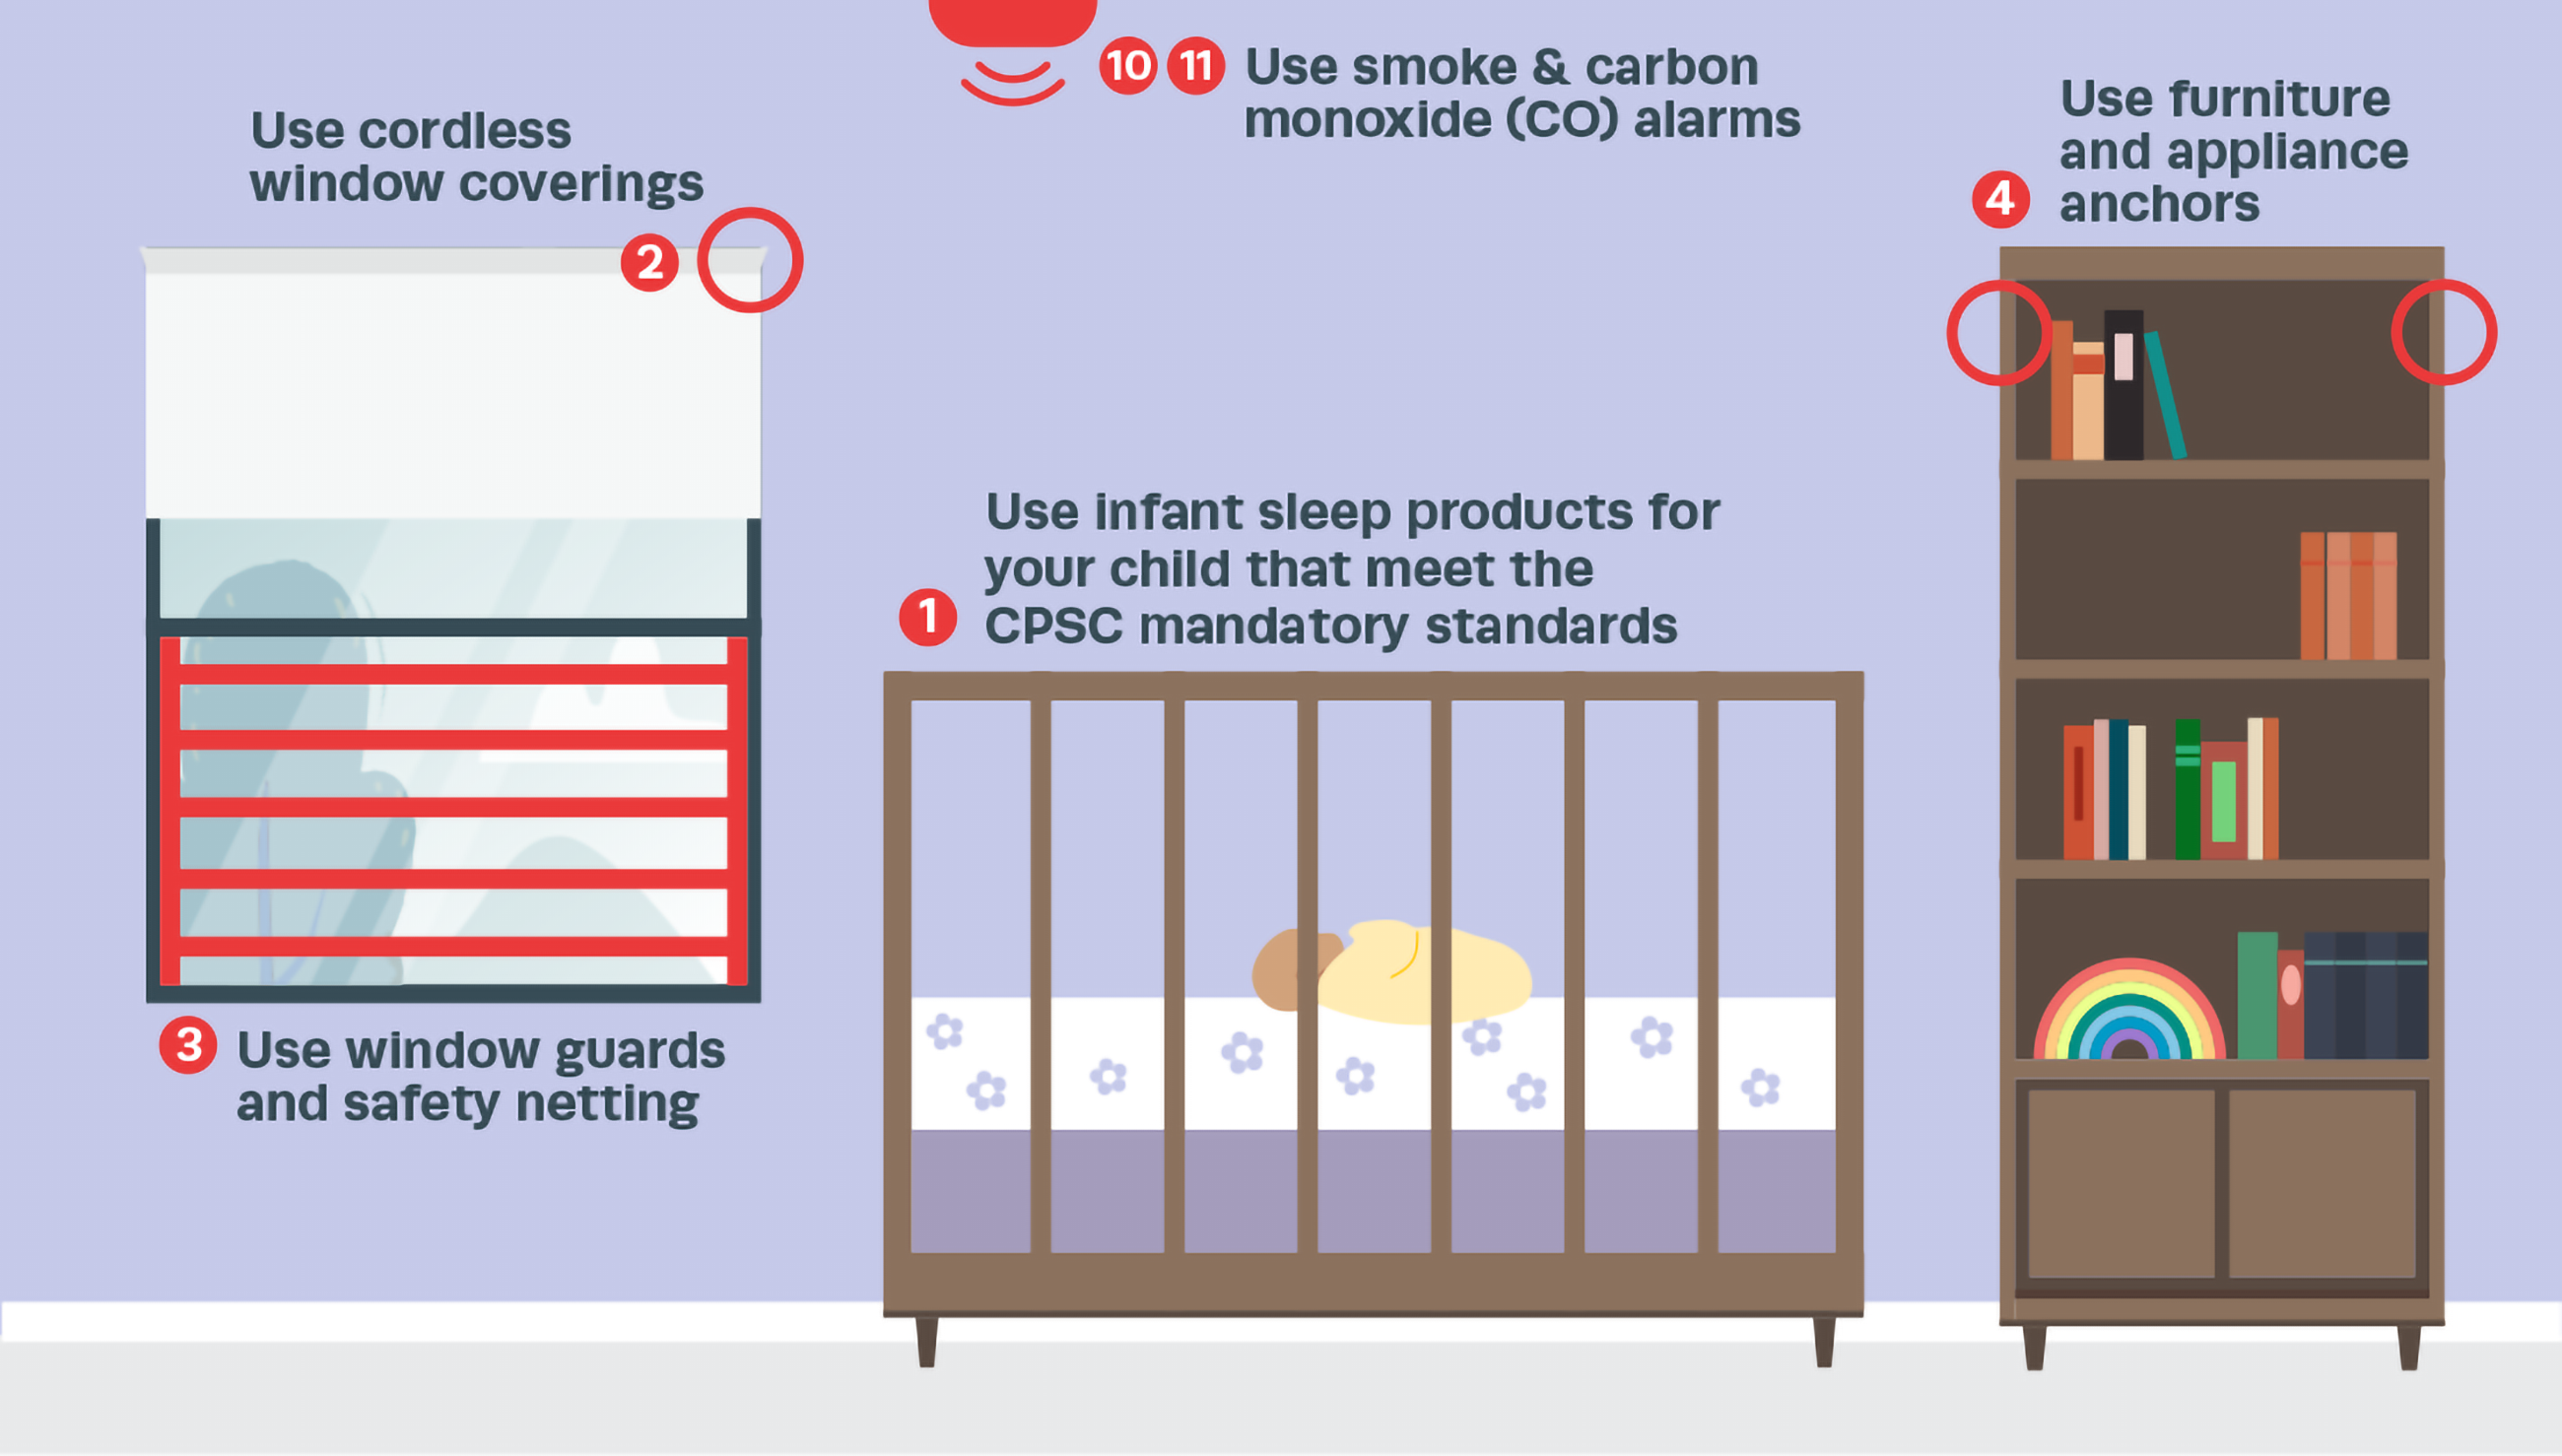 https://www.cpsc.gov/s3fs-public/inline-images/Childproofing_Bedroom.png?VersionId=php3ejFwo_8XgF6QDP7xsysQ6L4qWcv0